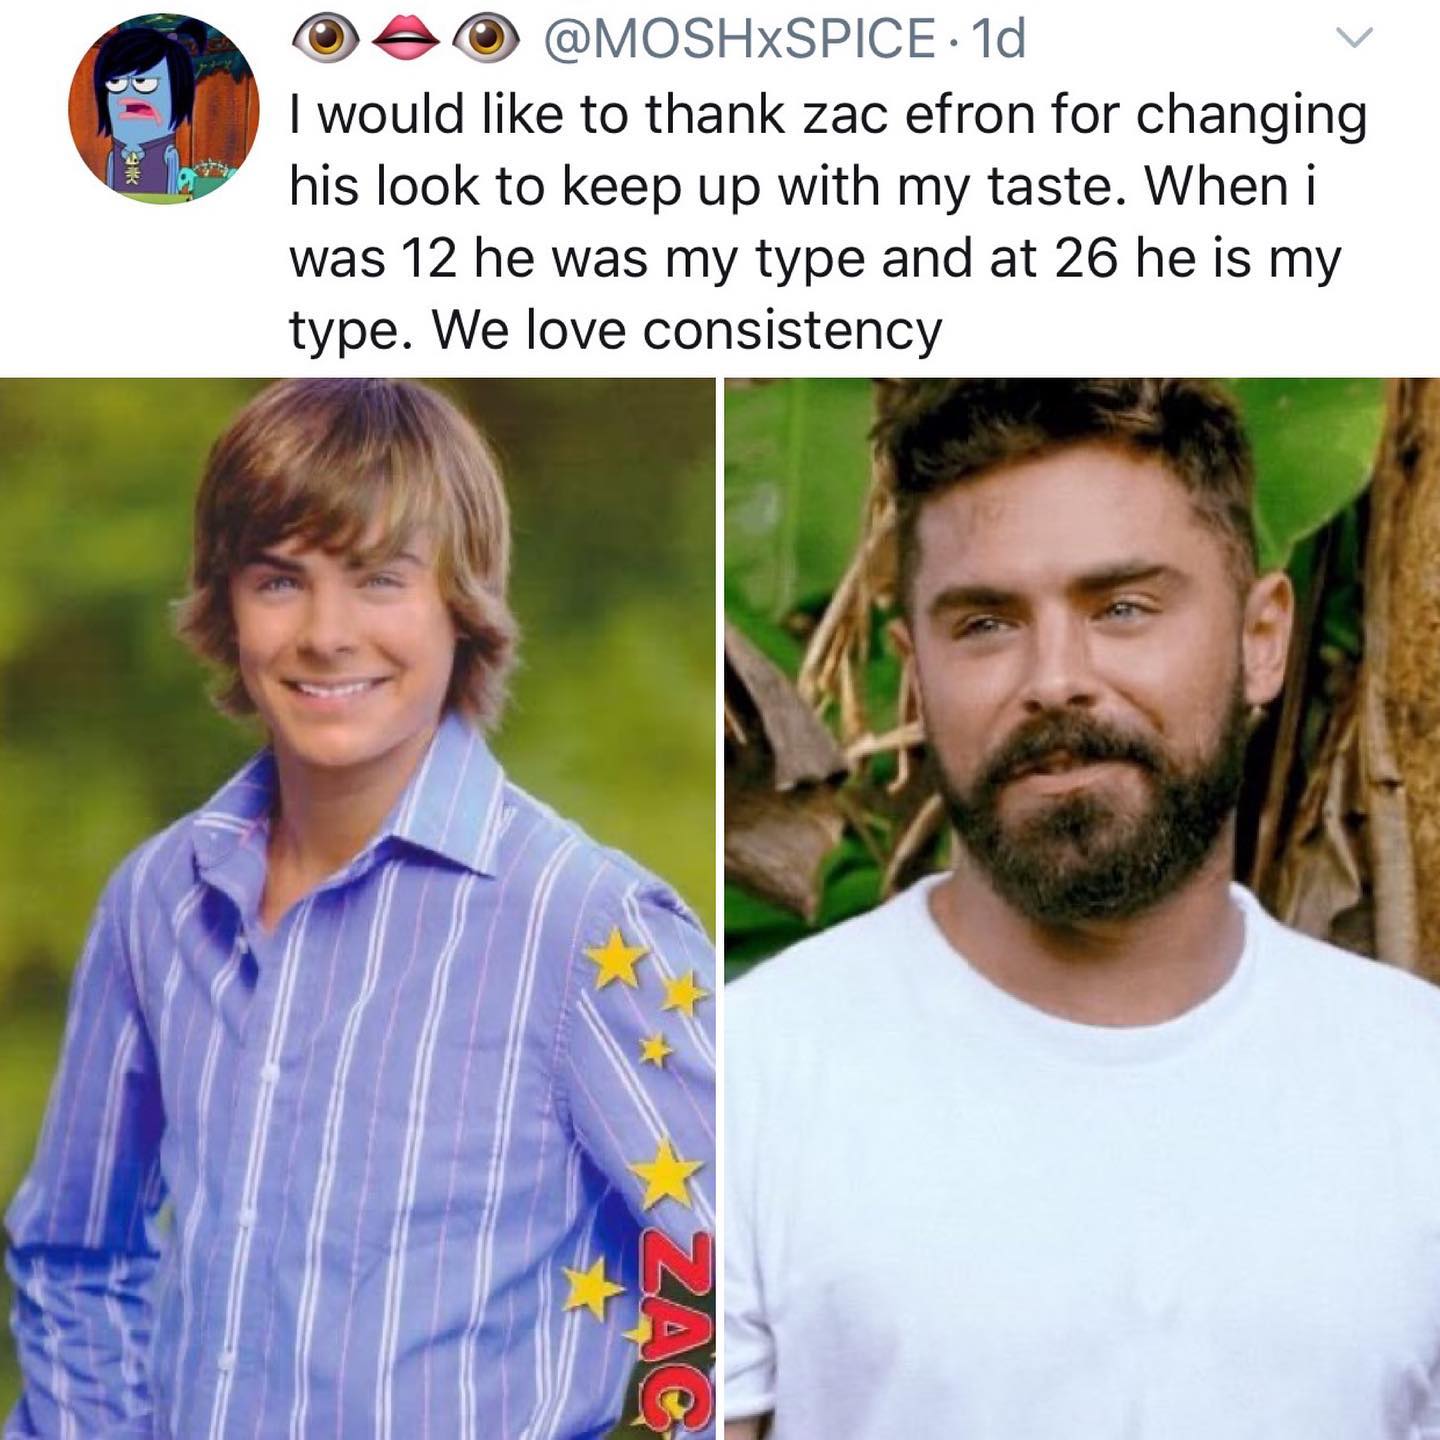 dank memes - twitter - zac efron down to earth twitter - 9 1d I would to thank zac efron for changing his look to keep up with my taste. When i was 12 he was my type and at 26 he is my type. We love consistency Za